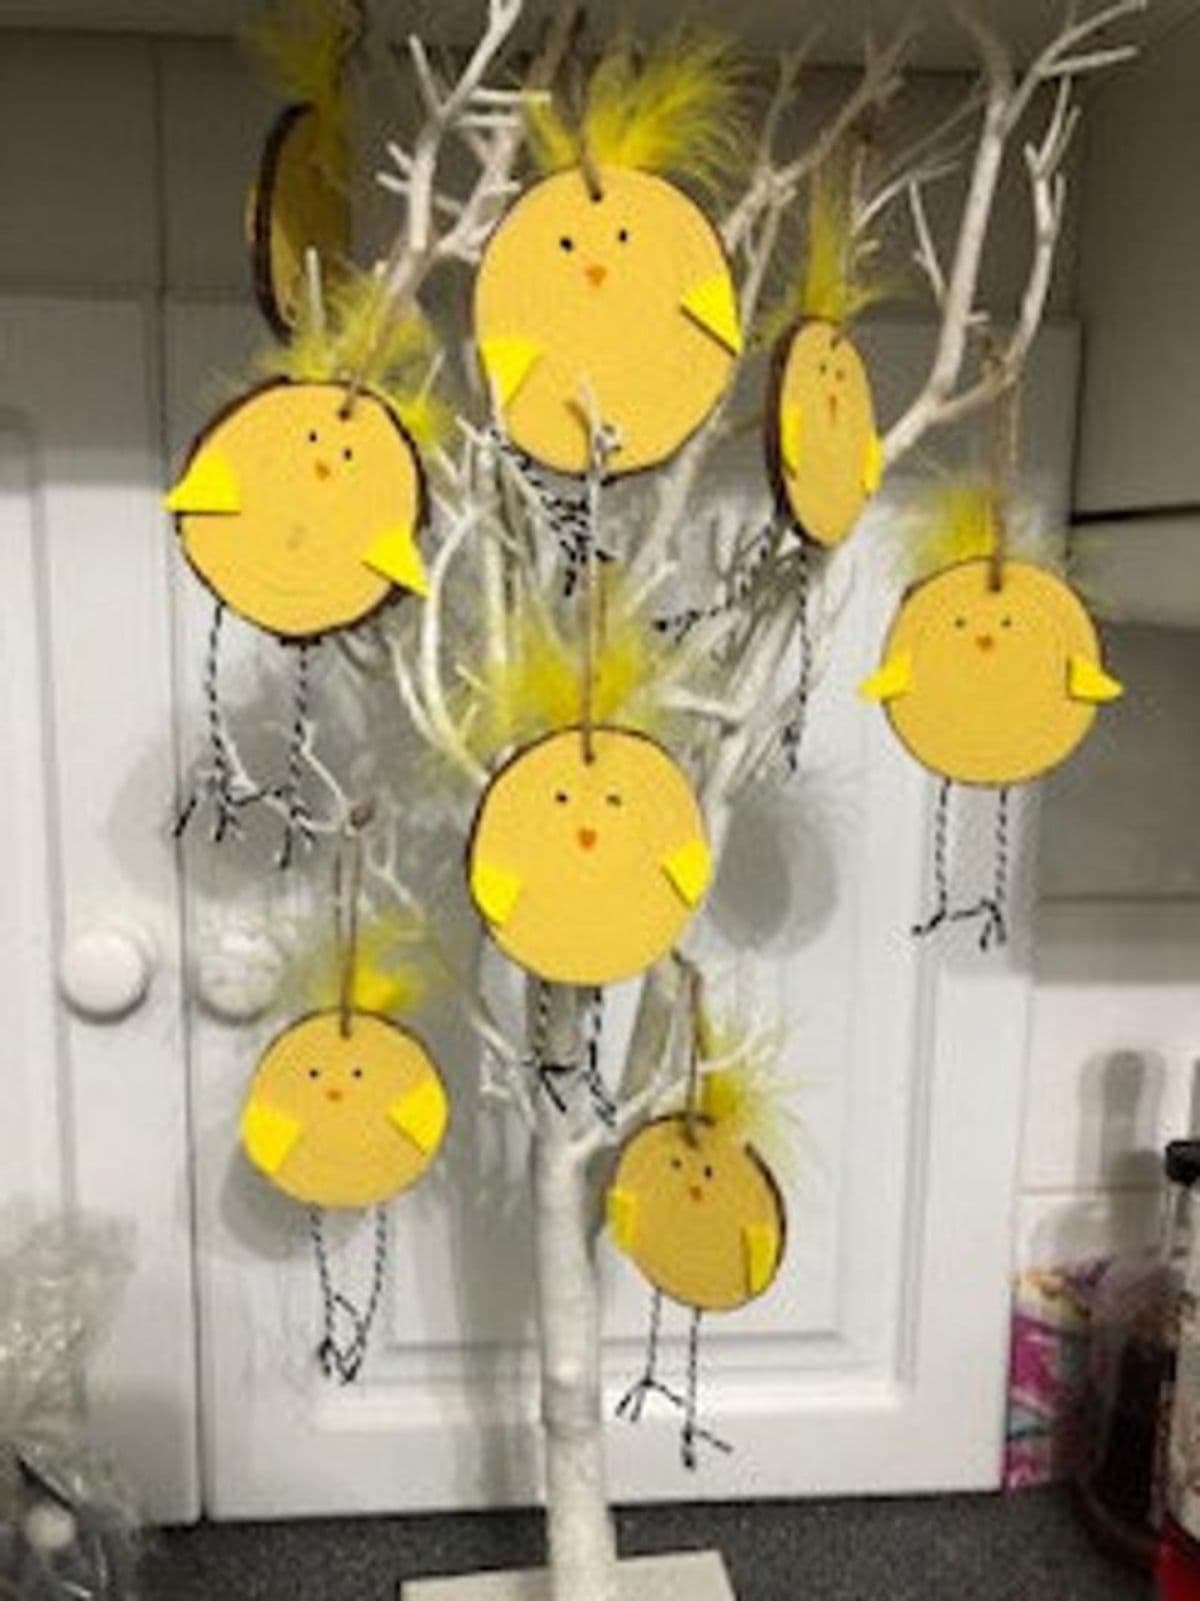 Hanging from an easter tree are 8 wooden slices decorated in yellow to look like chicks